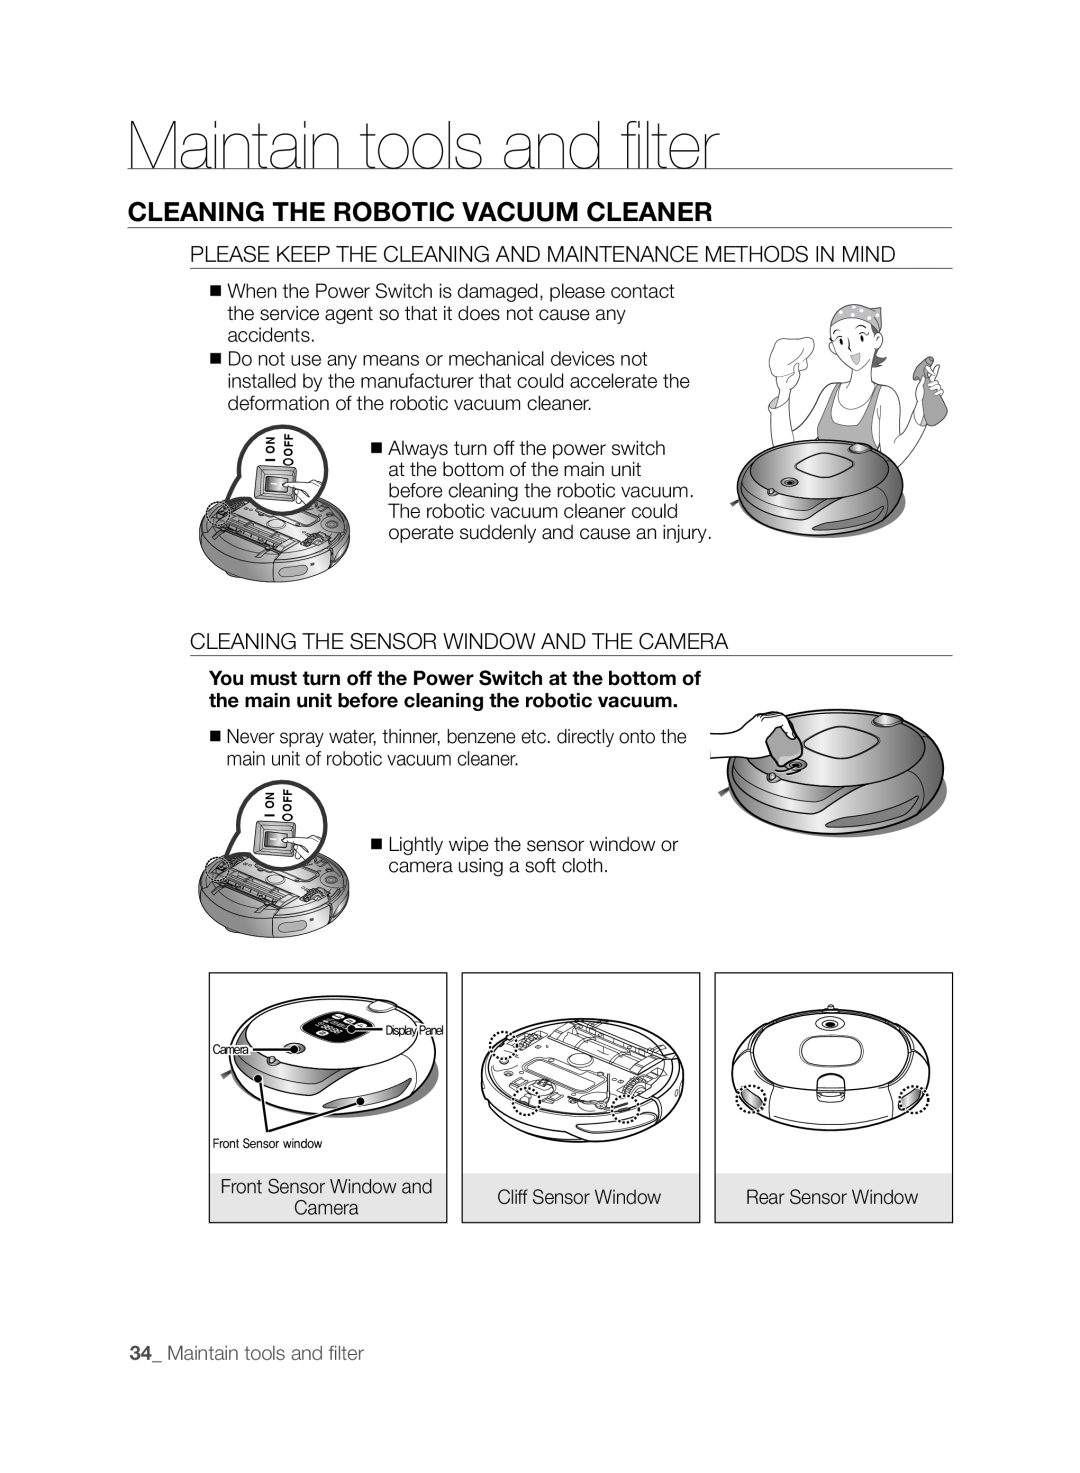 Samsung SR8830, VCR8830T1R, DJ68-00518A user manual Cleaning the robotic vacuum cleaner, 34_ Maintain tools and filter 